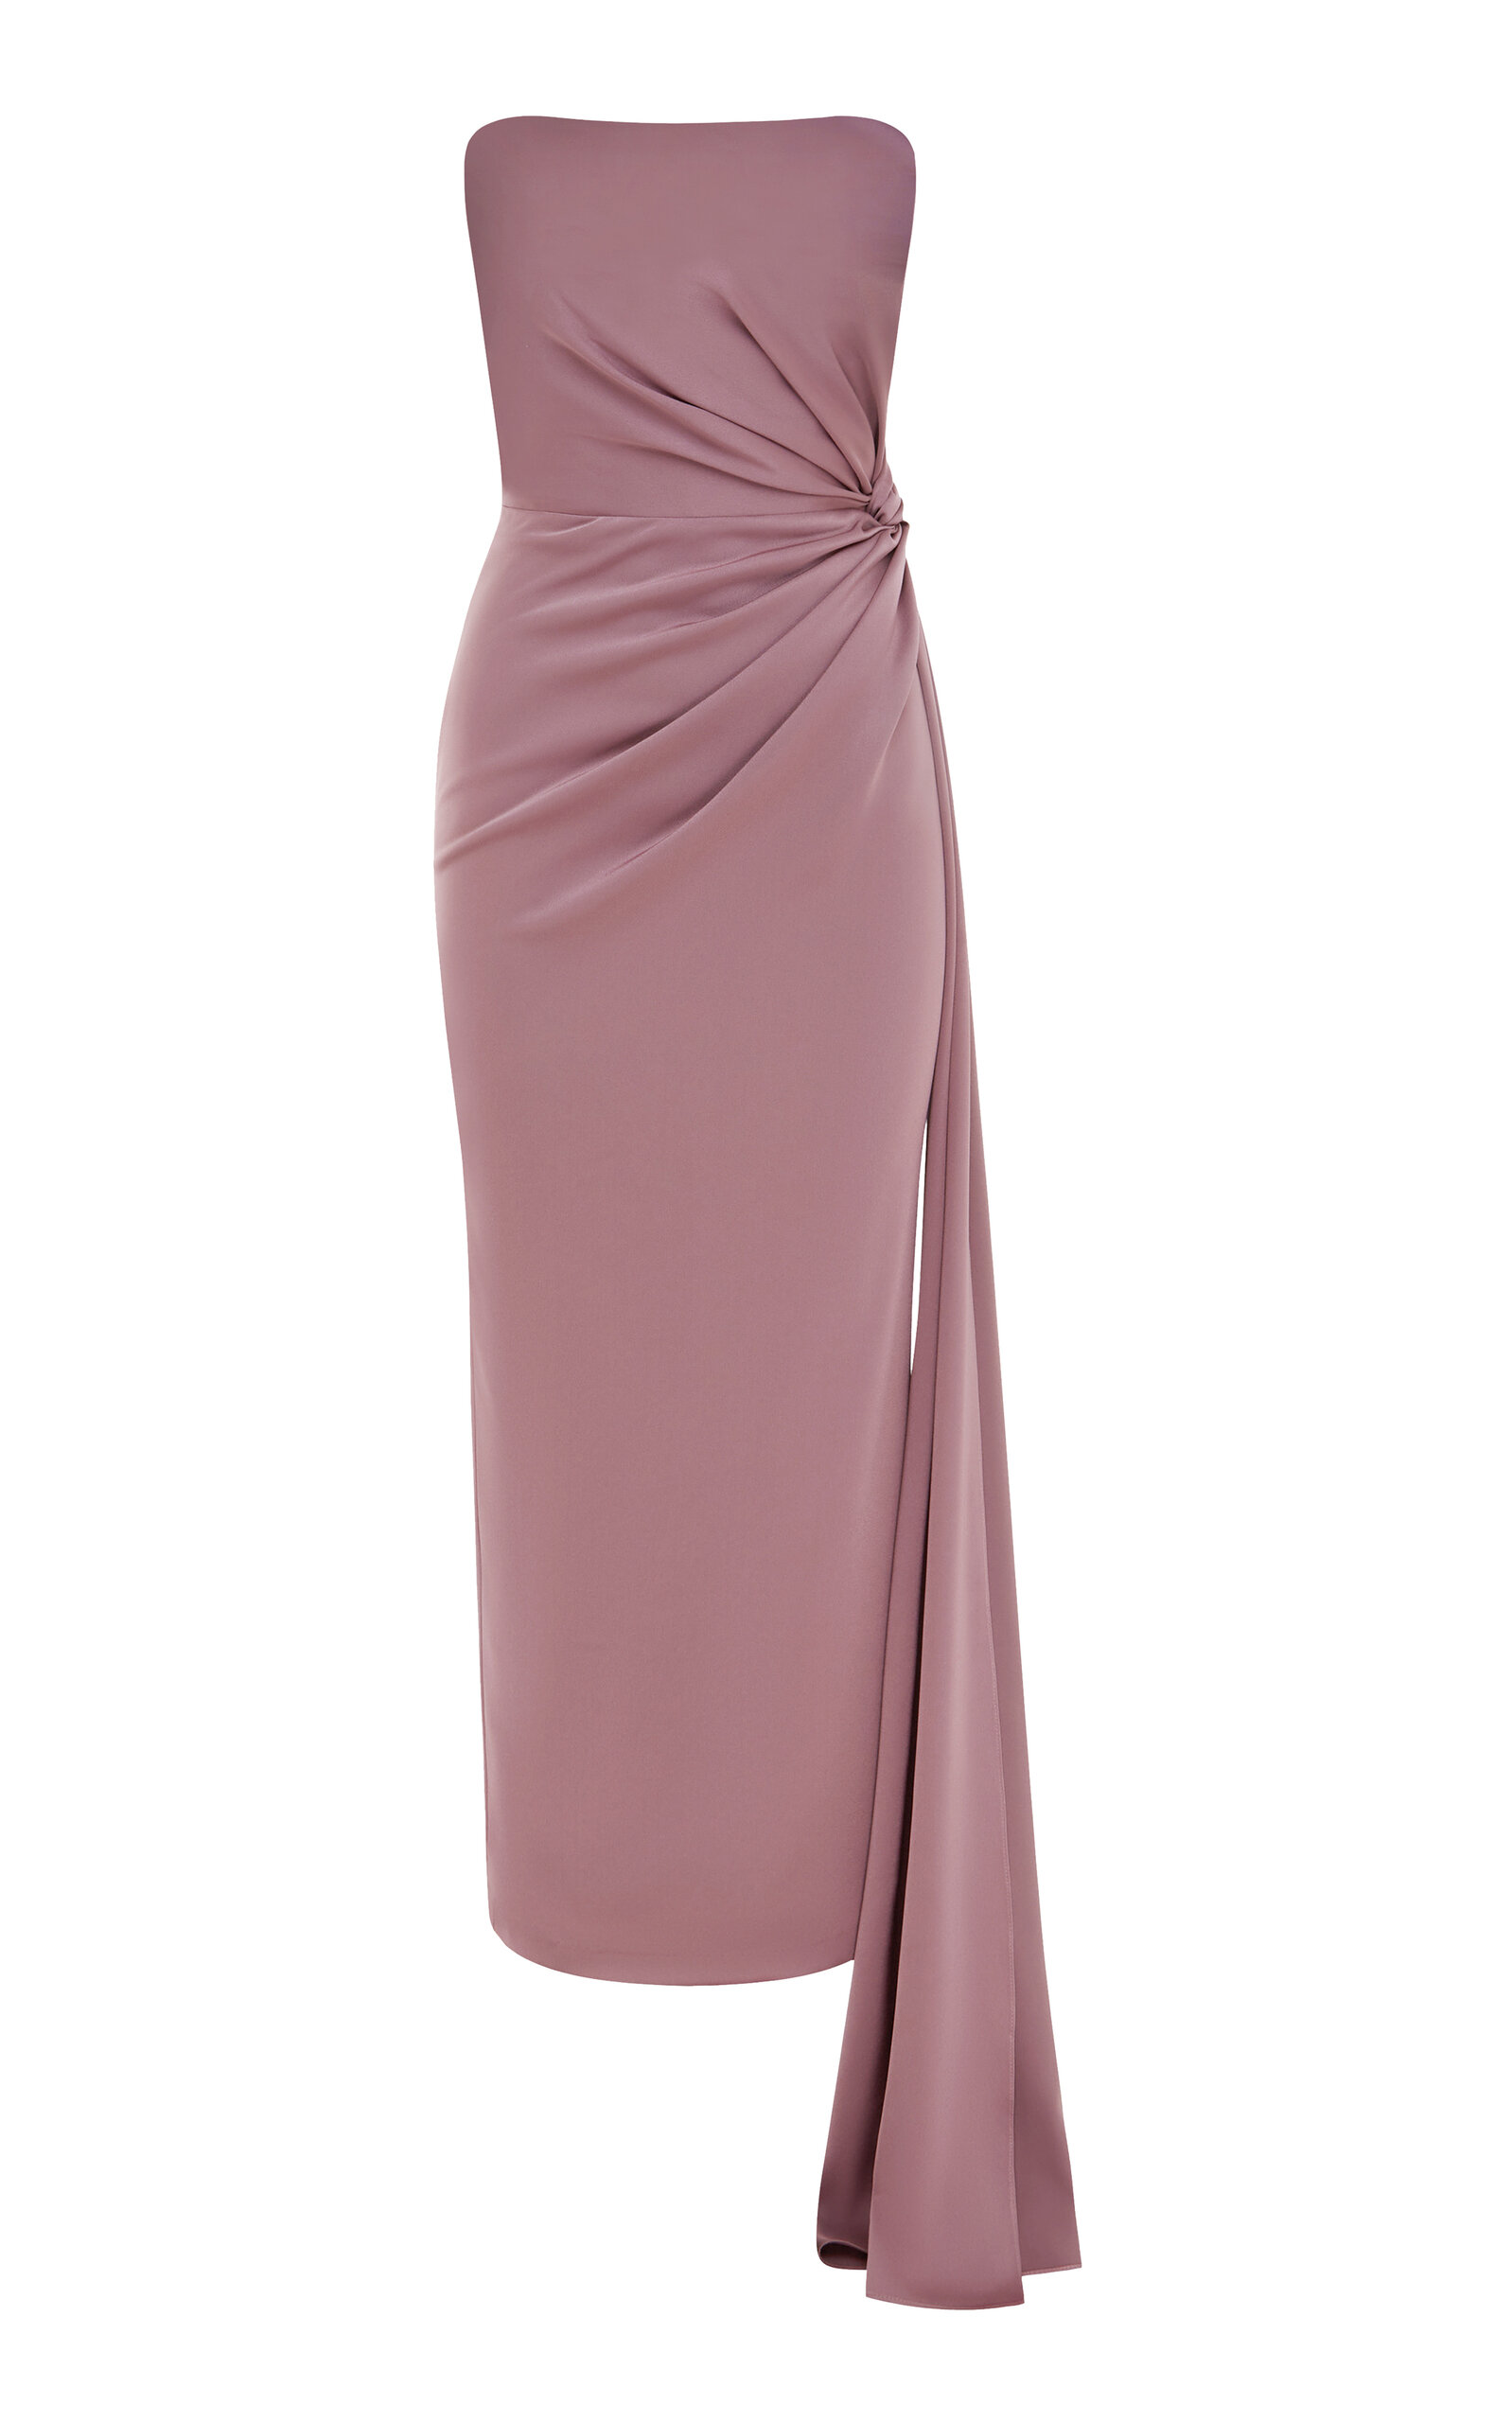 Alex Perry Twisted Satin Crepe Strapless Midi Dress In Pink